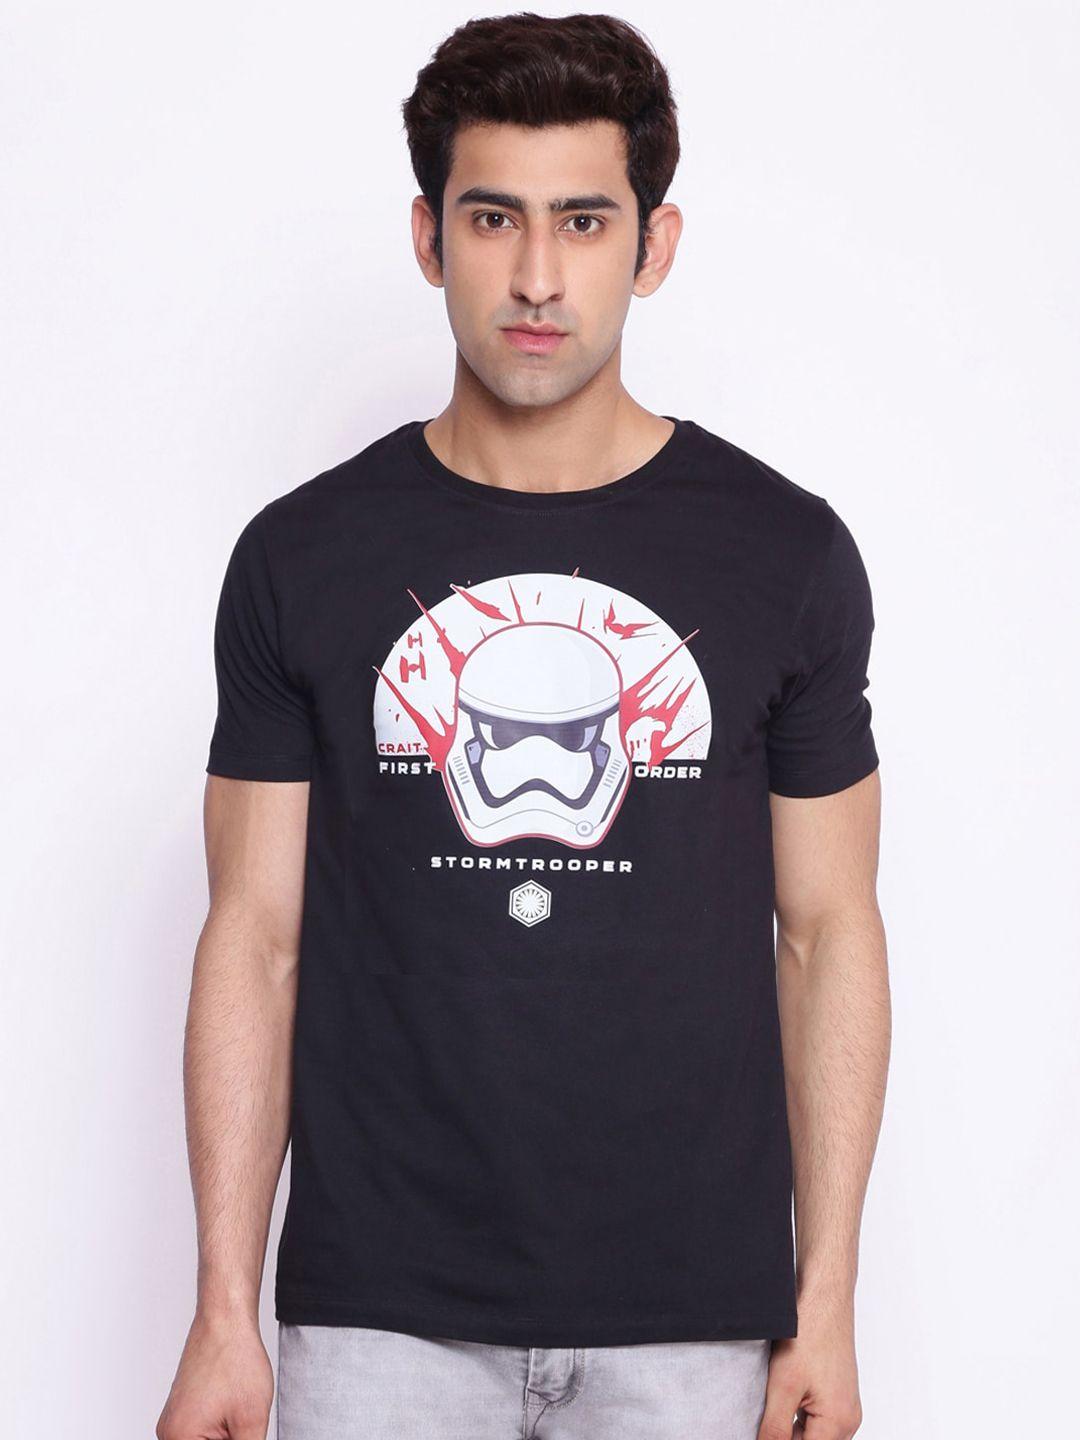 star-wars-by-wear-your-mind-men-black-graphic-printed-t-shirt